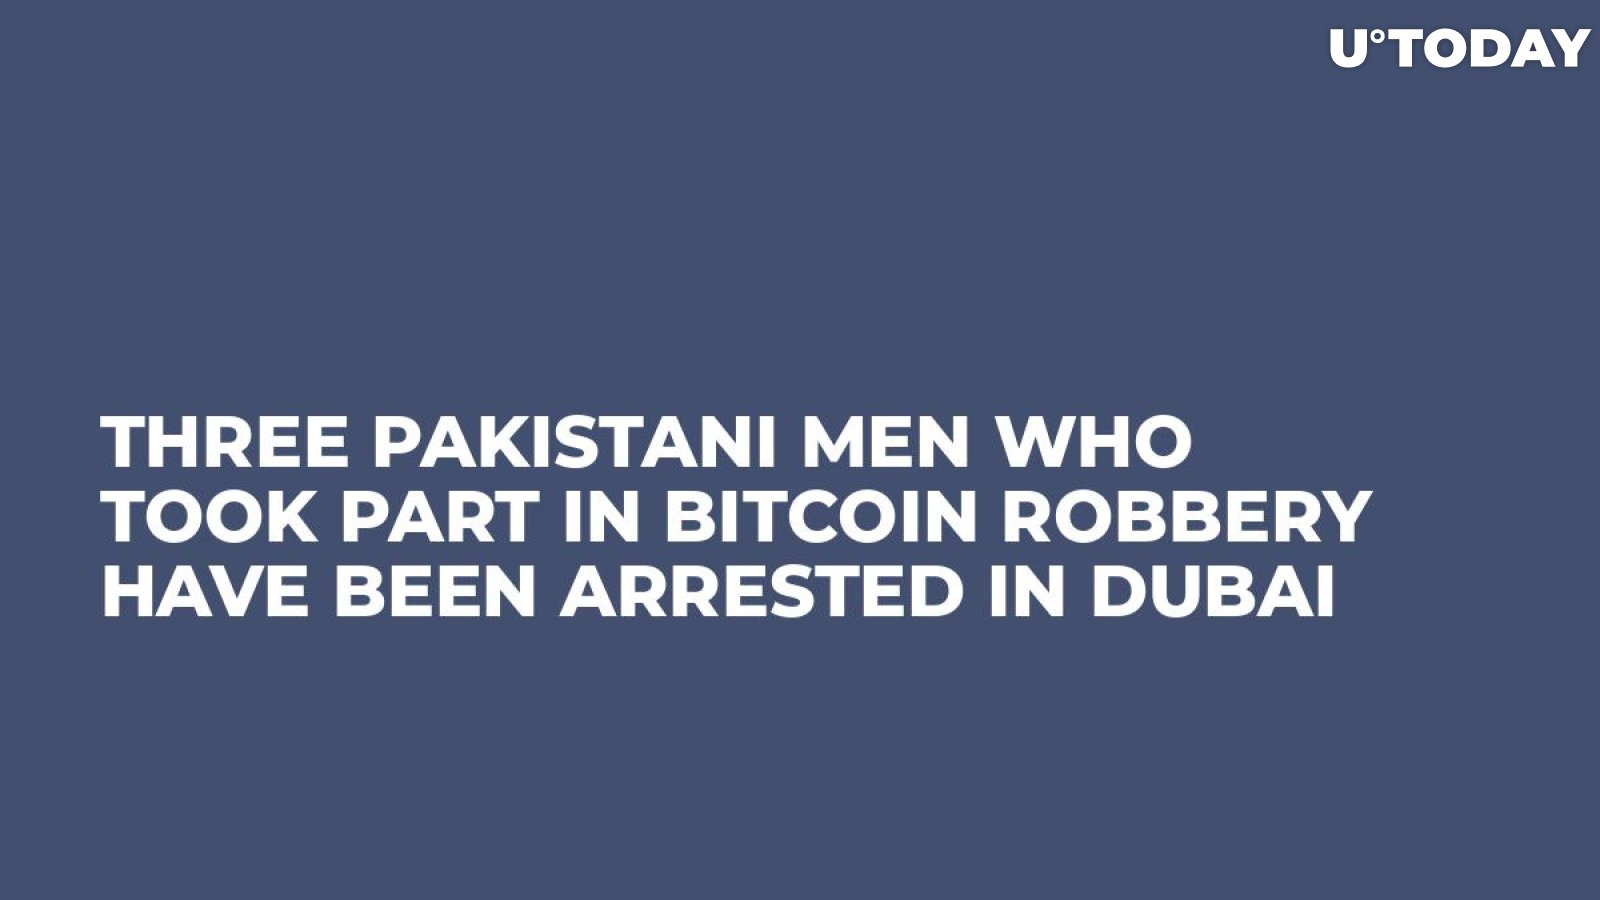 Three Pakistani Men Who Took Part in Bitcoin Robbery Have Been Arrested in Dubai 